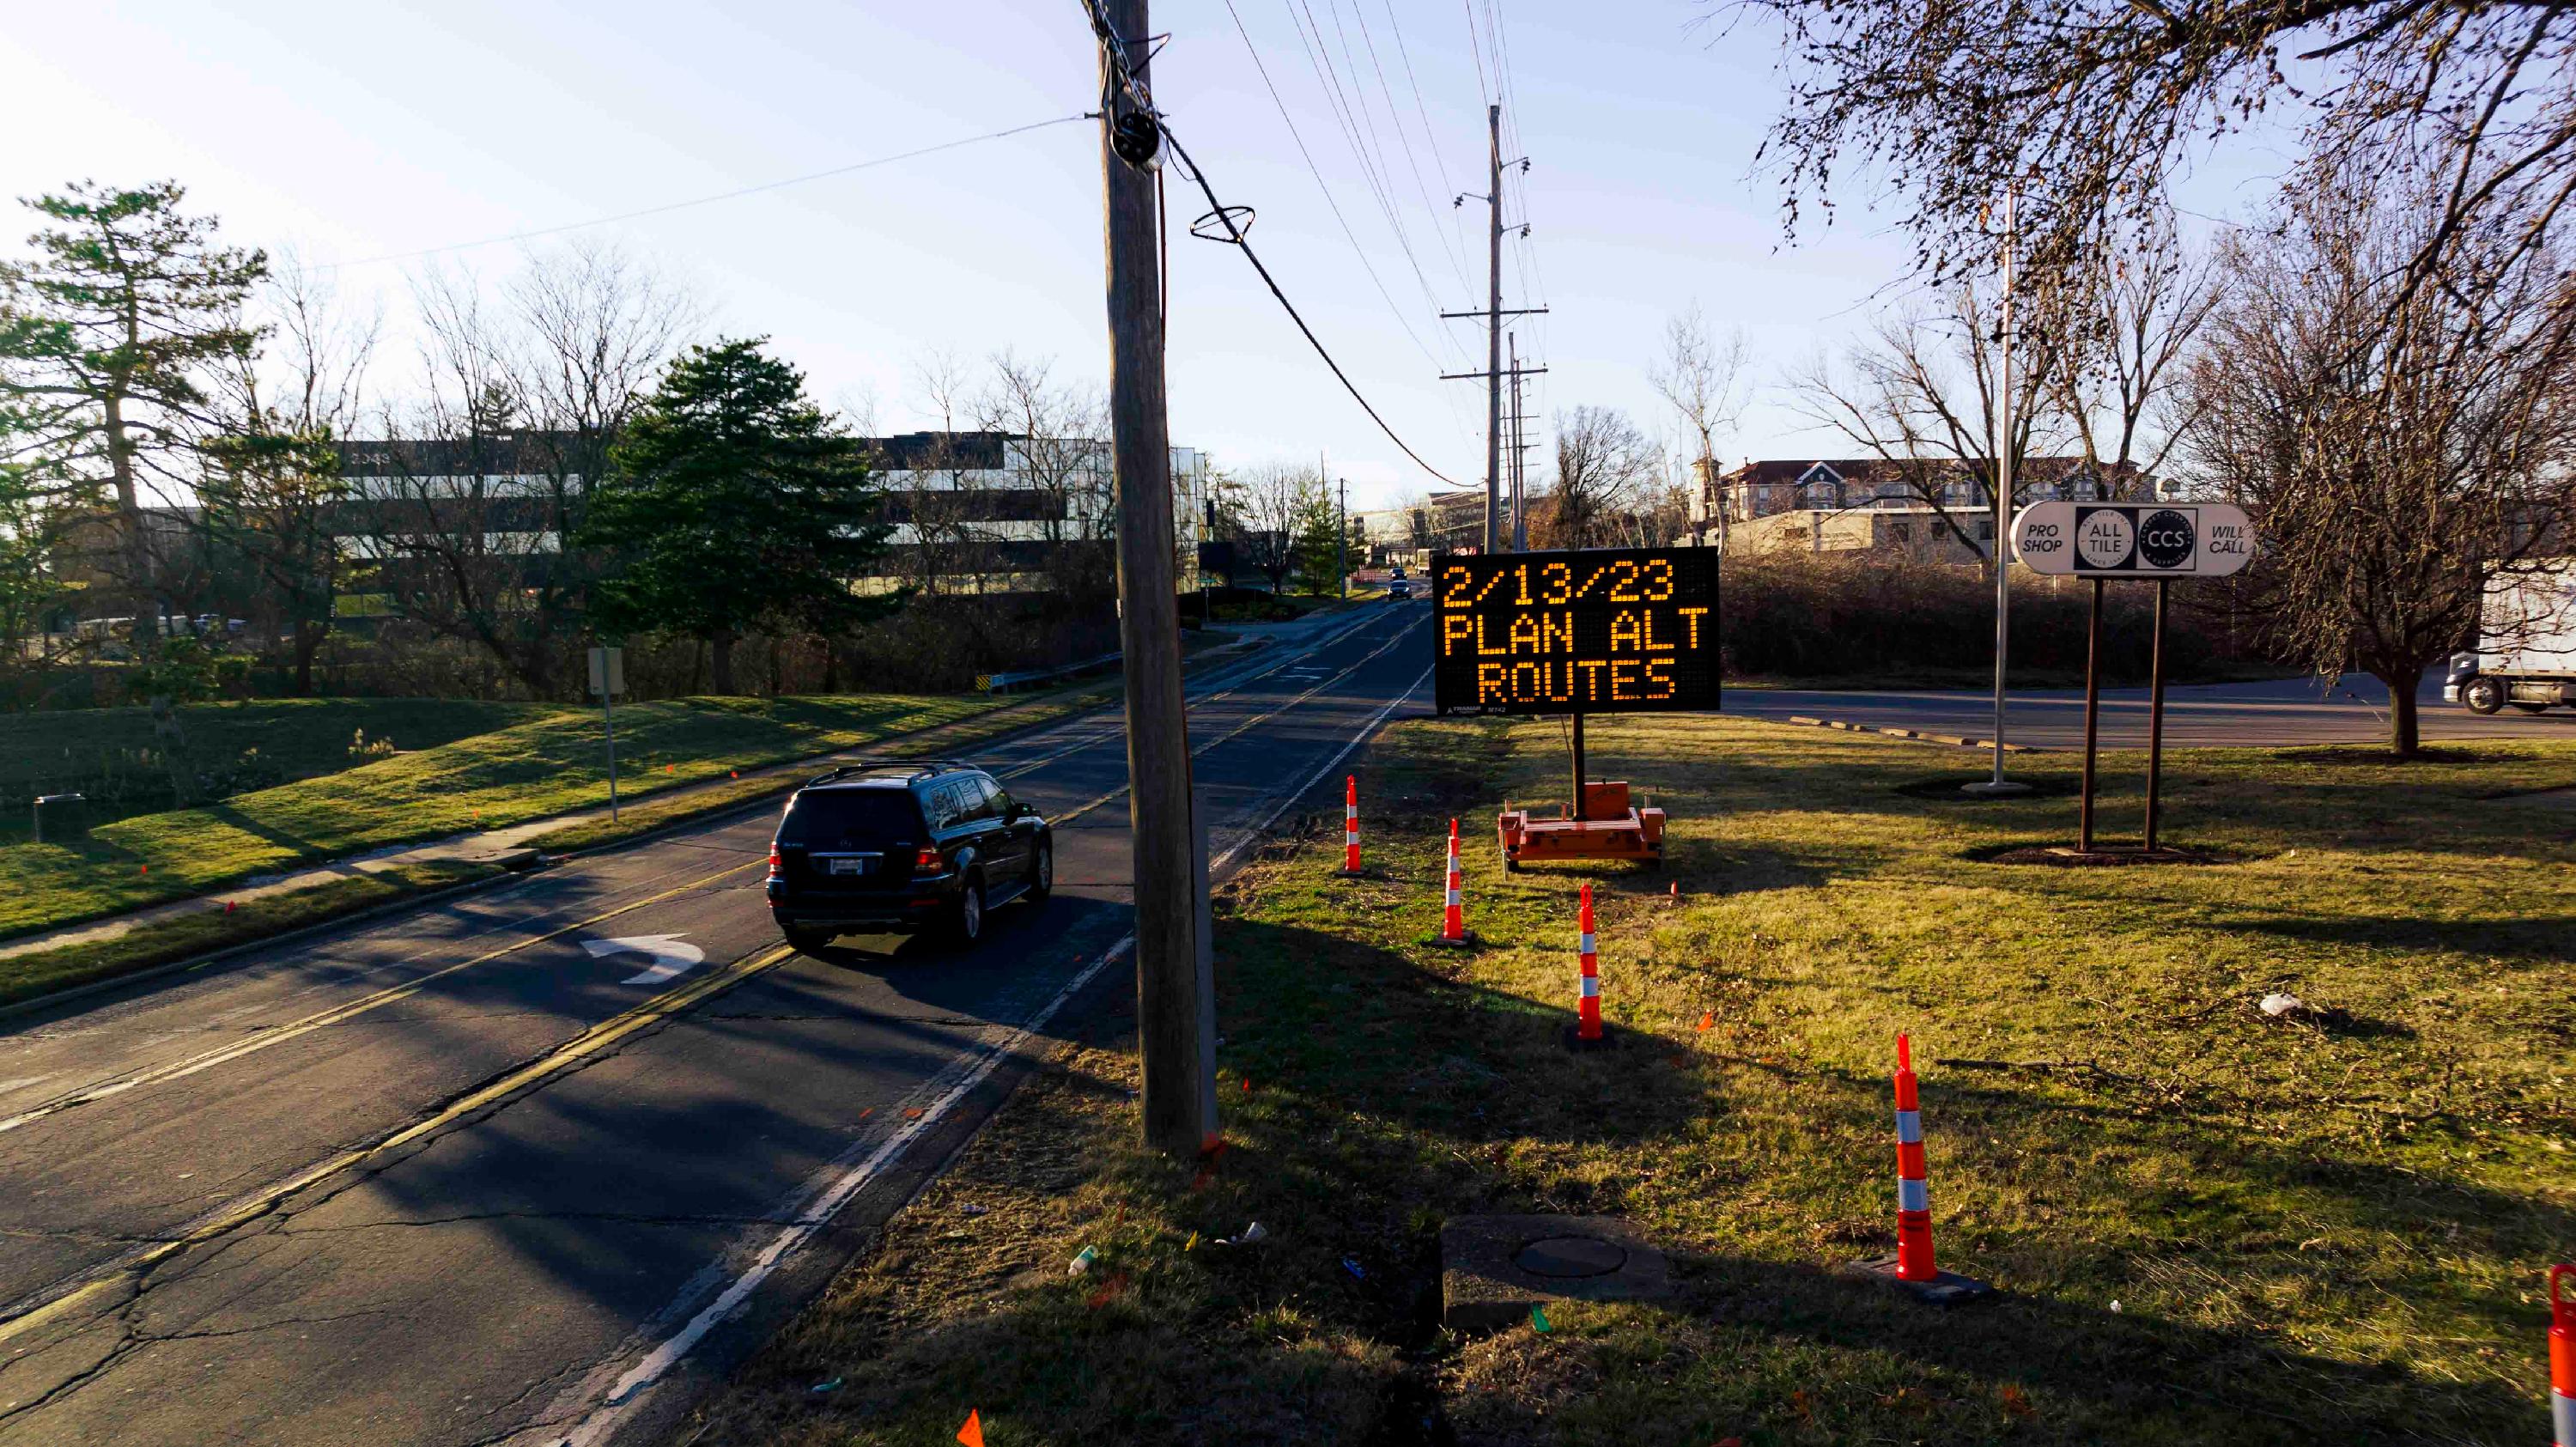 A car drives on Lackland Road as a sign reads "2/13/23 - Plan Alt Routes" in refrence to a scheduled maintenance closure